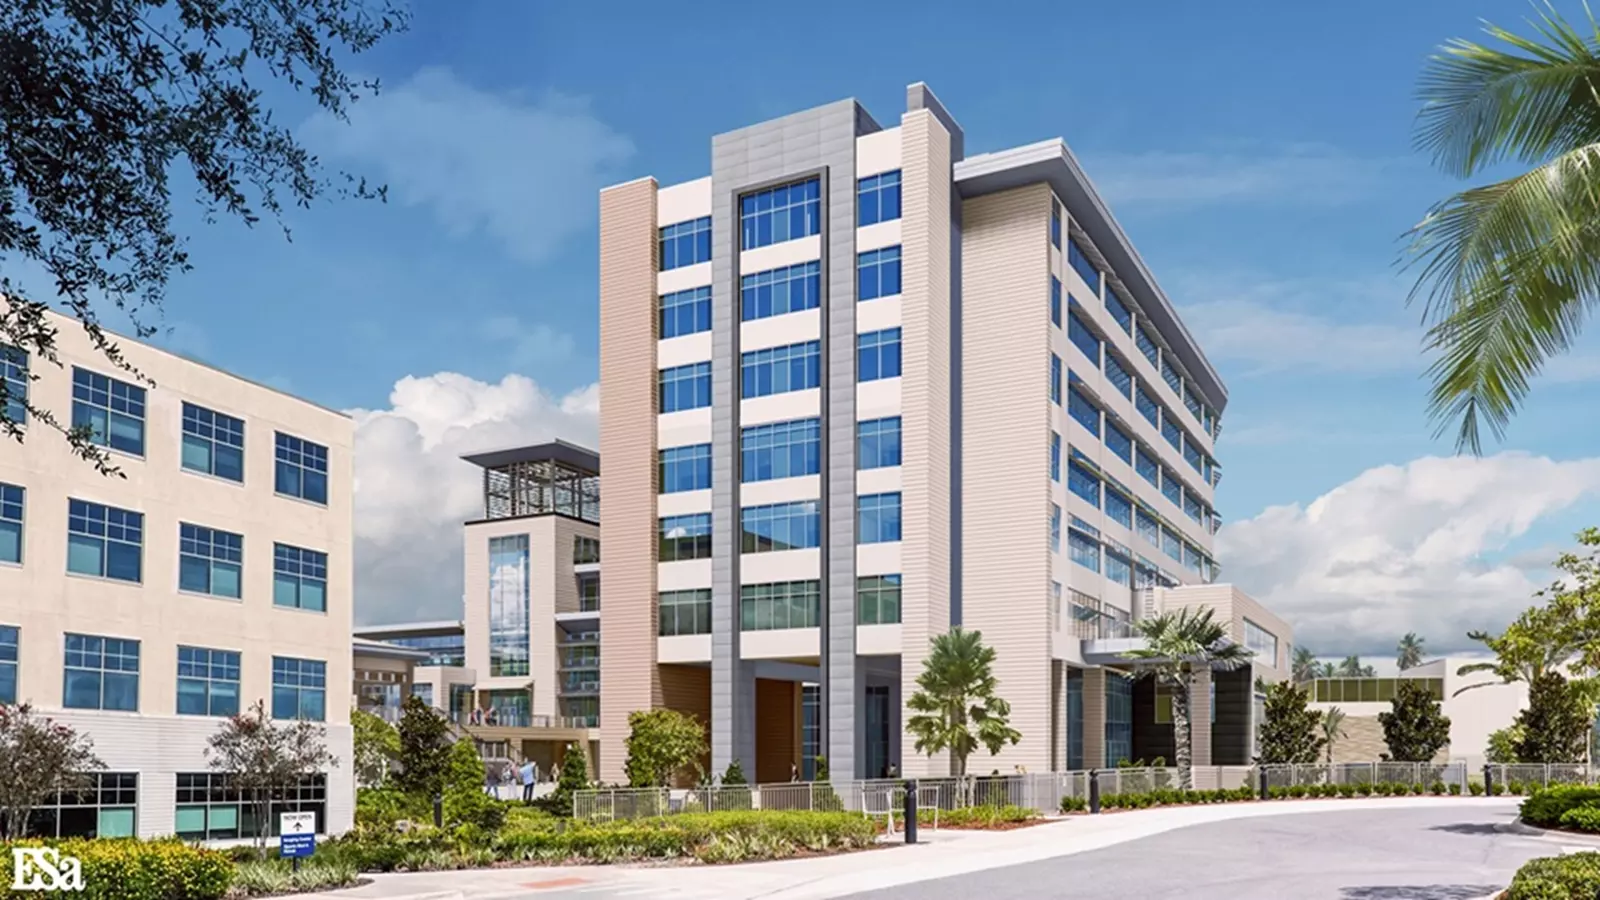 A major expansion at AdventHealth Winter Garden will add three floors to the hospital's patient tower and bring additional women's services to West Orange County.